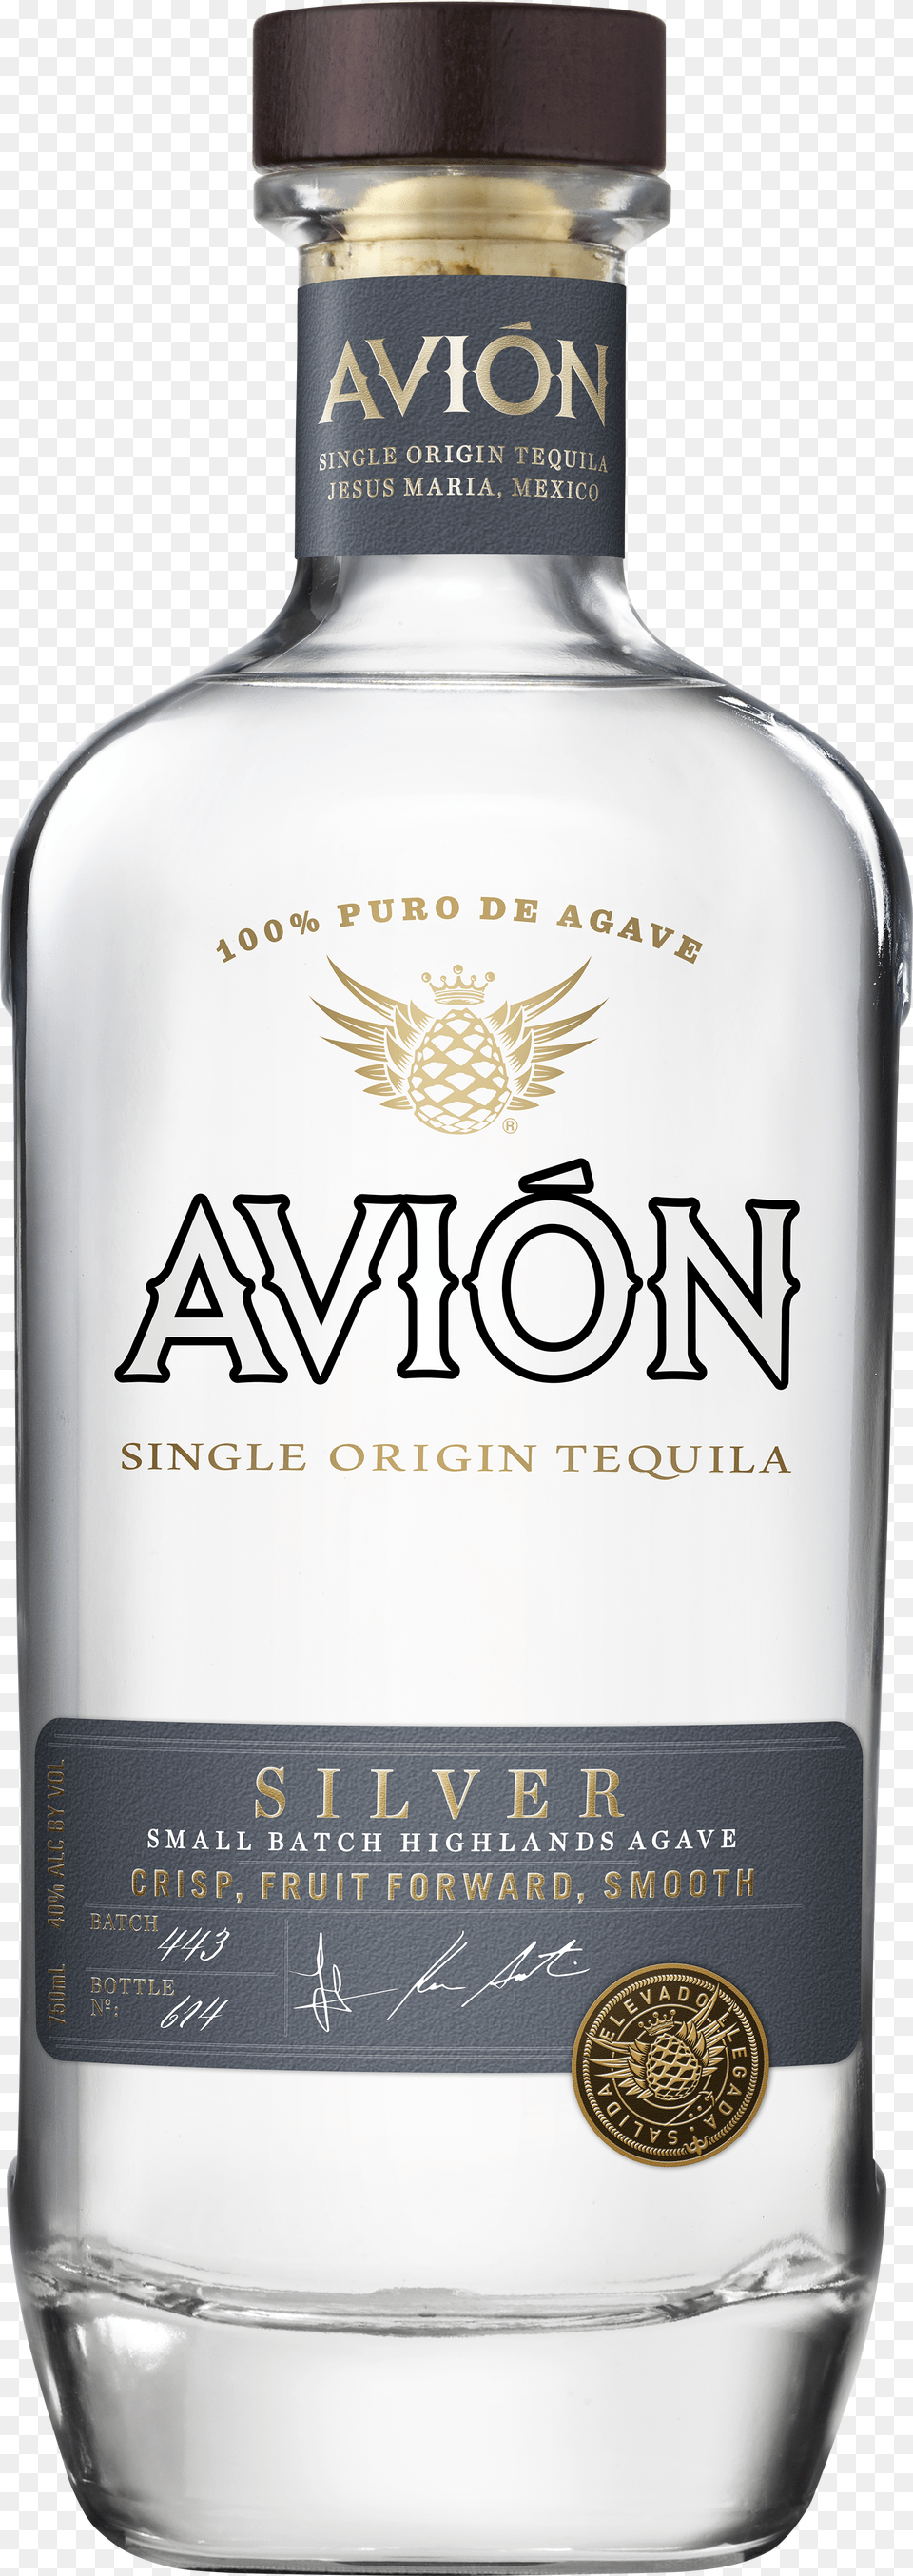 Avion Tequila Mexico Silver 750ml Bottle Avion Silver Tequila Png Image